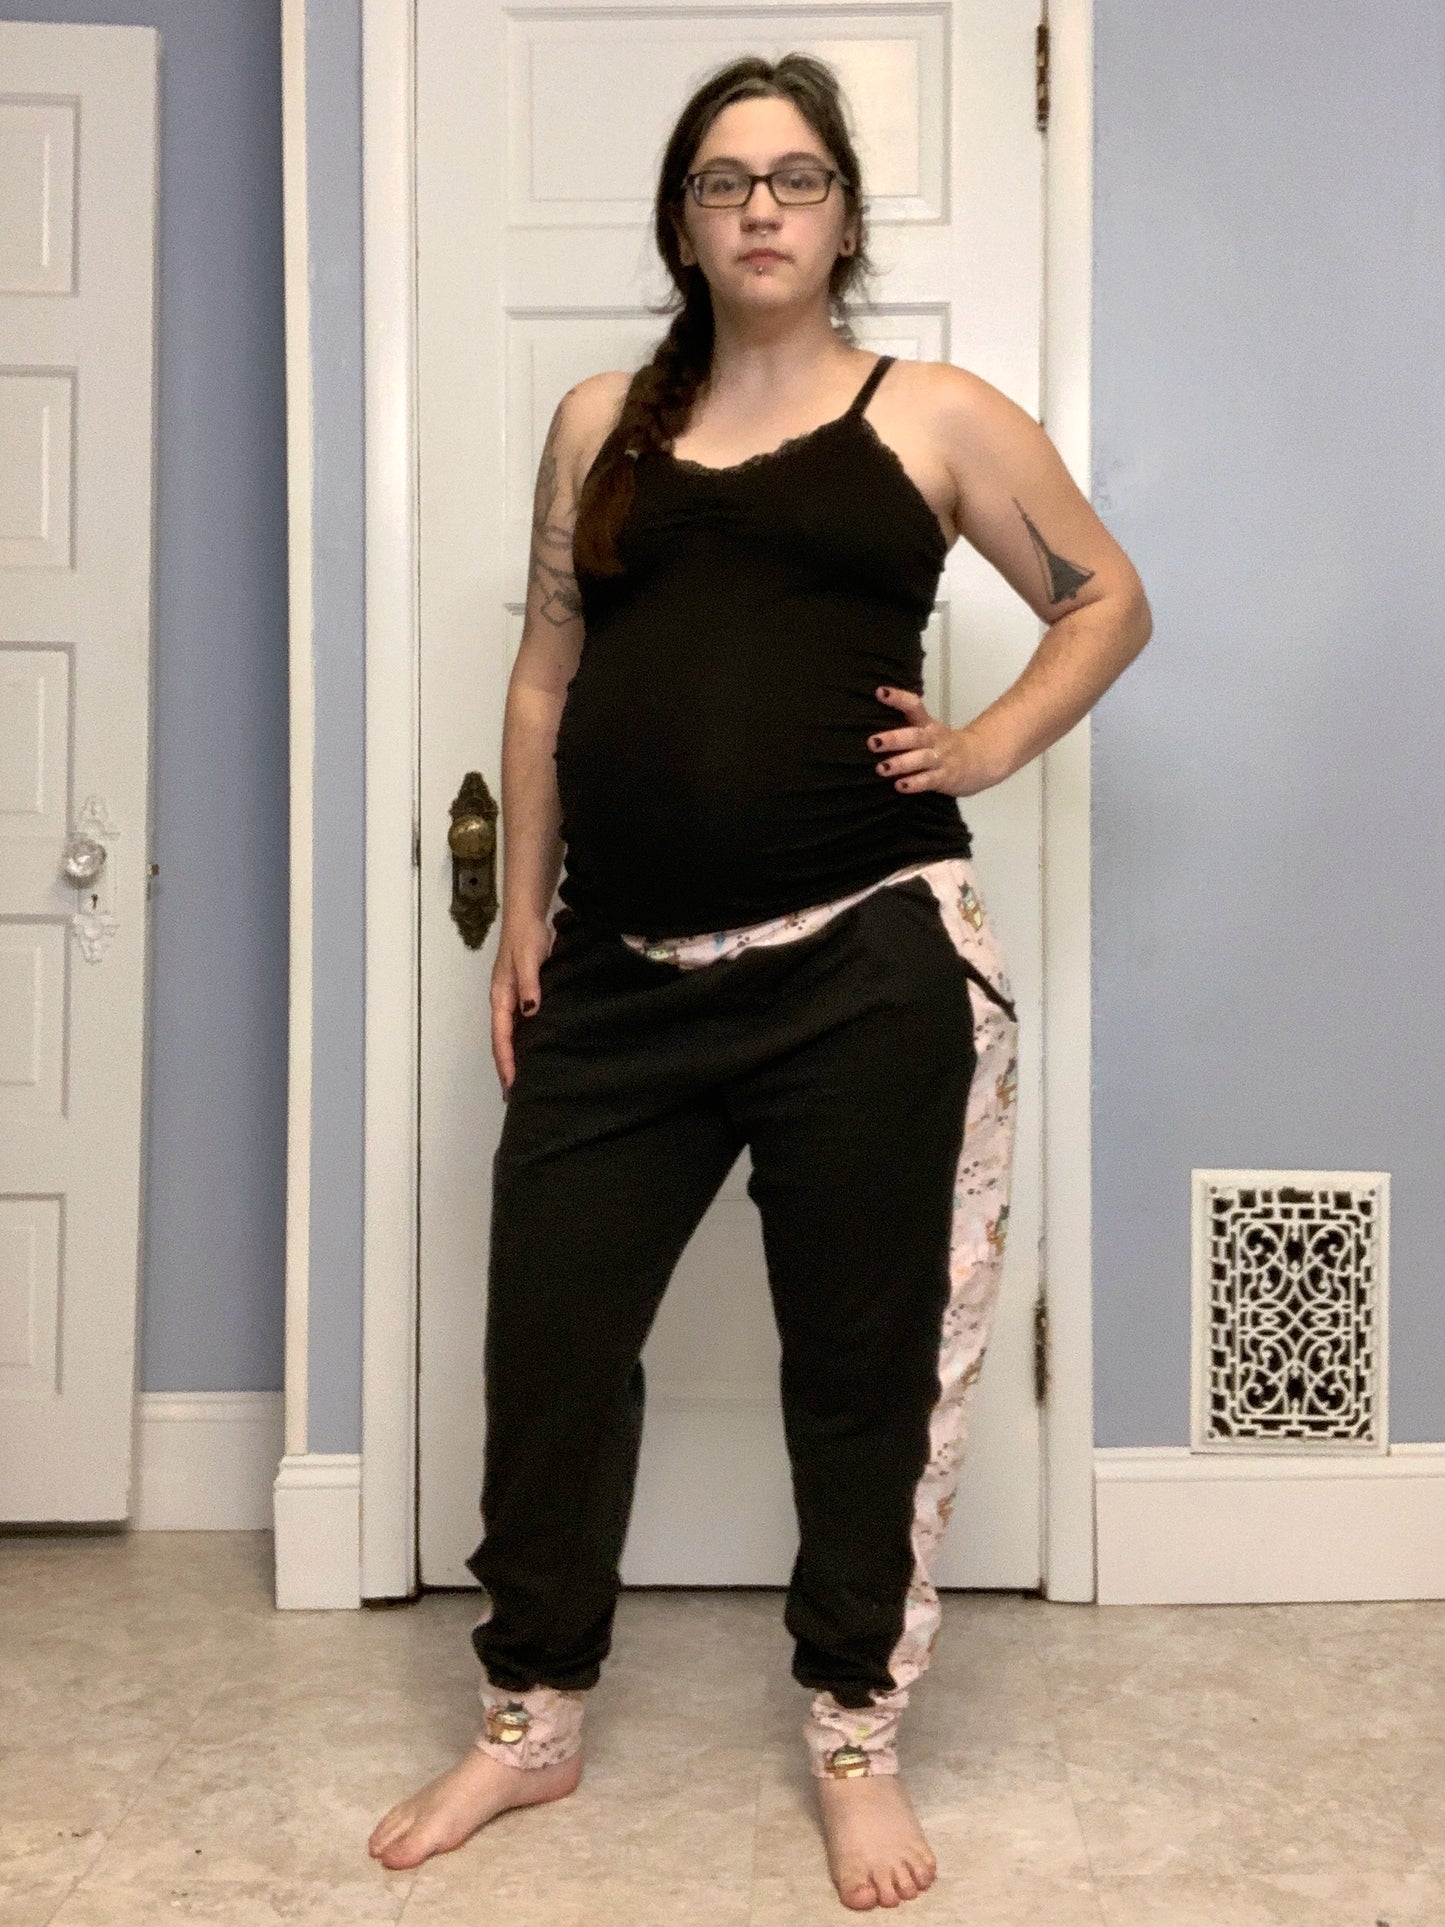 ADULT SIZE Jammin Joggers - PDF - Digital Pattern File for garment sewing